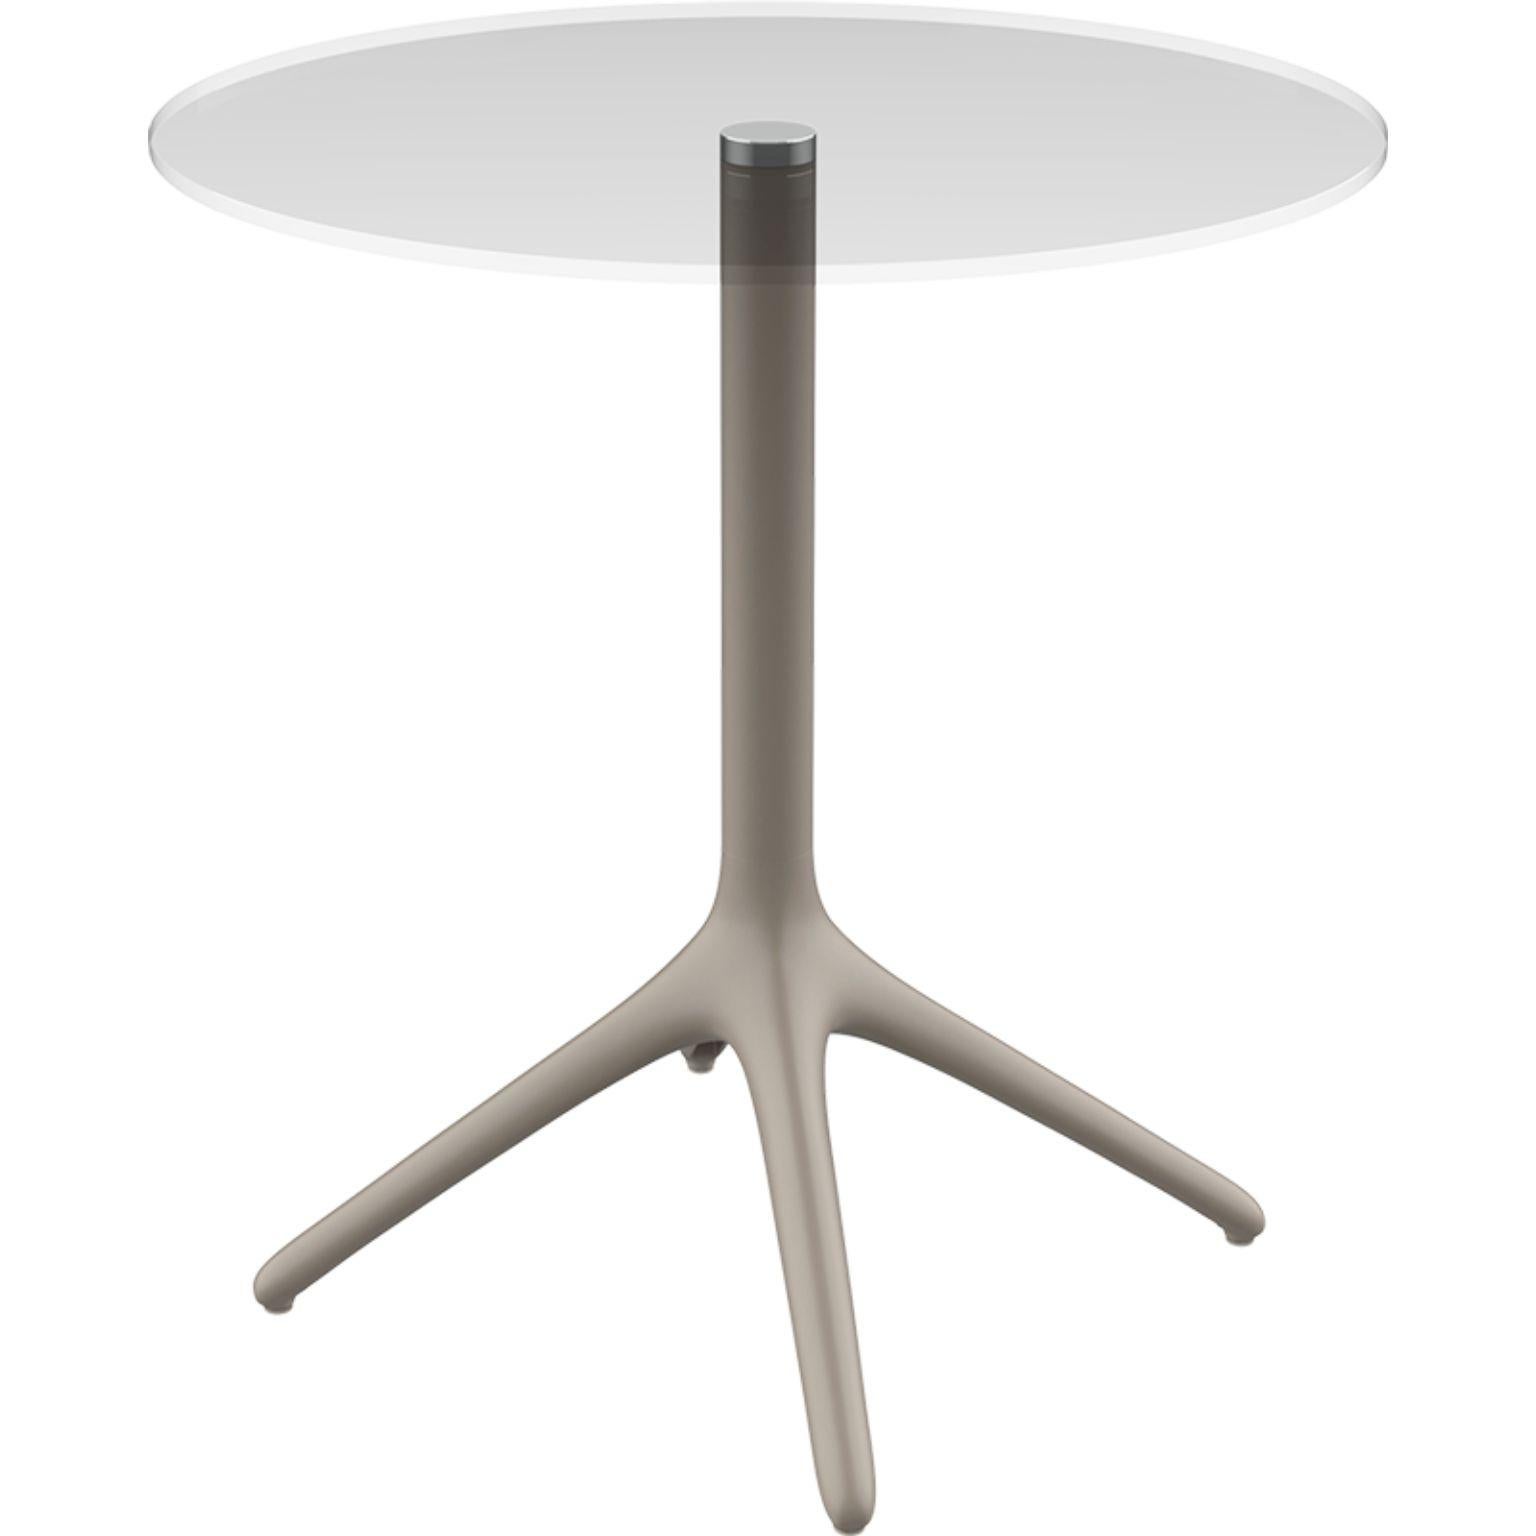 Spanish Uni Black Table 73 by MOWEE For Sale